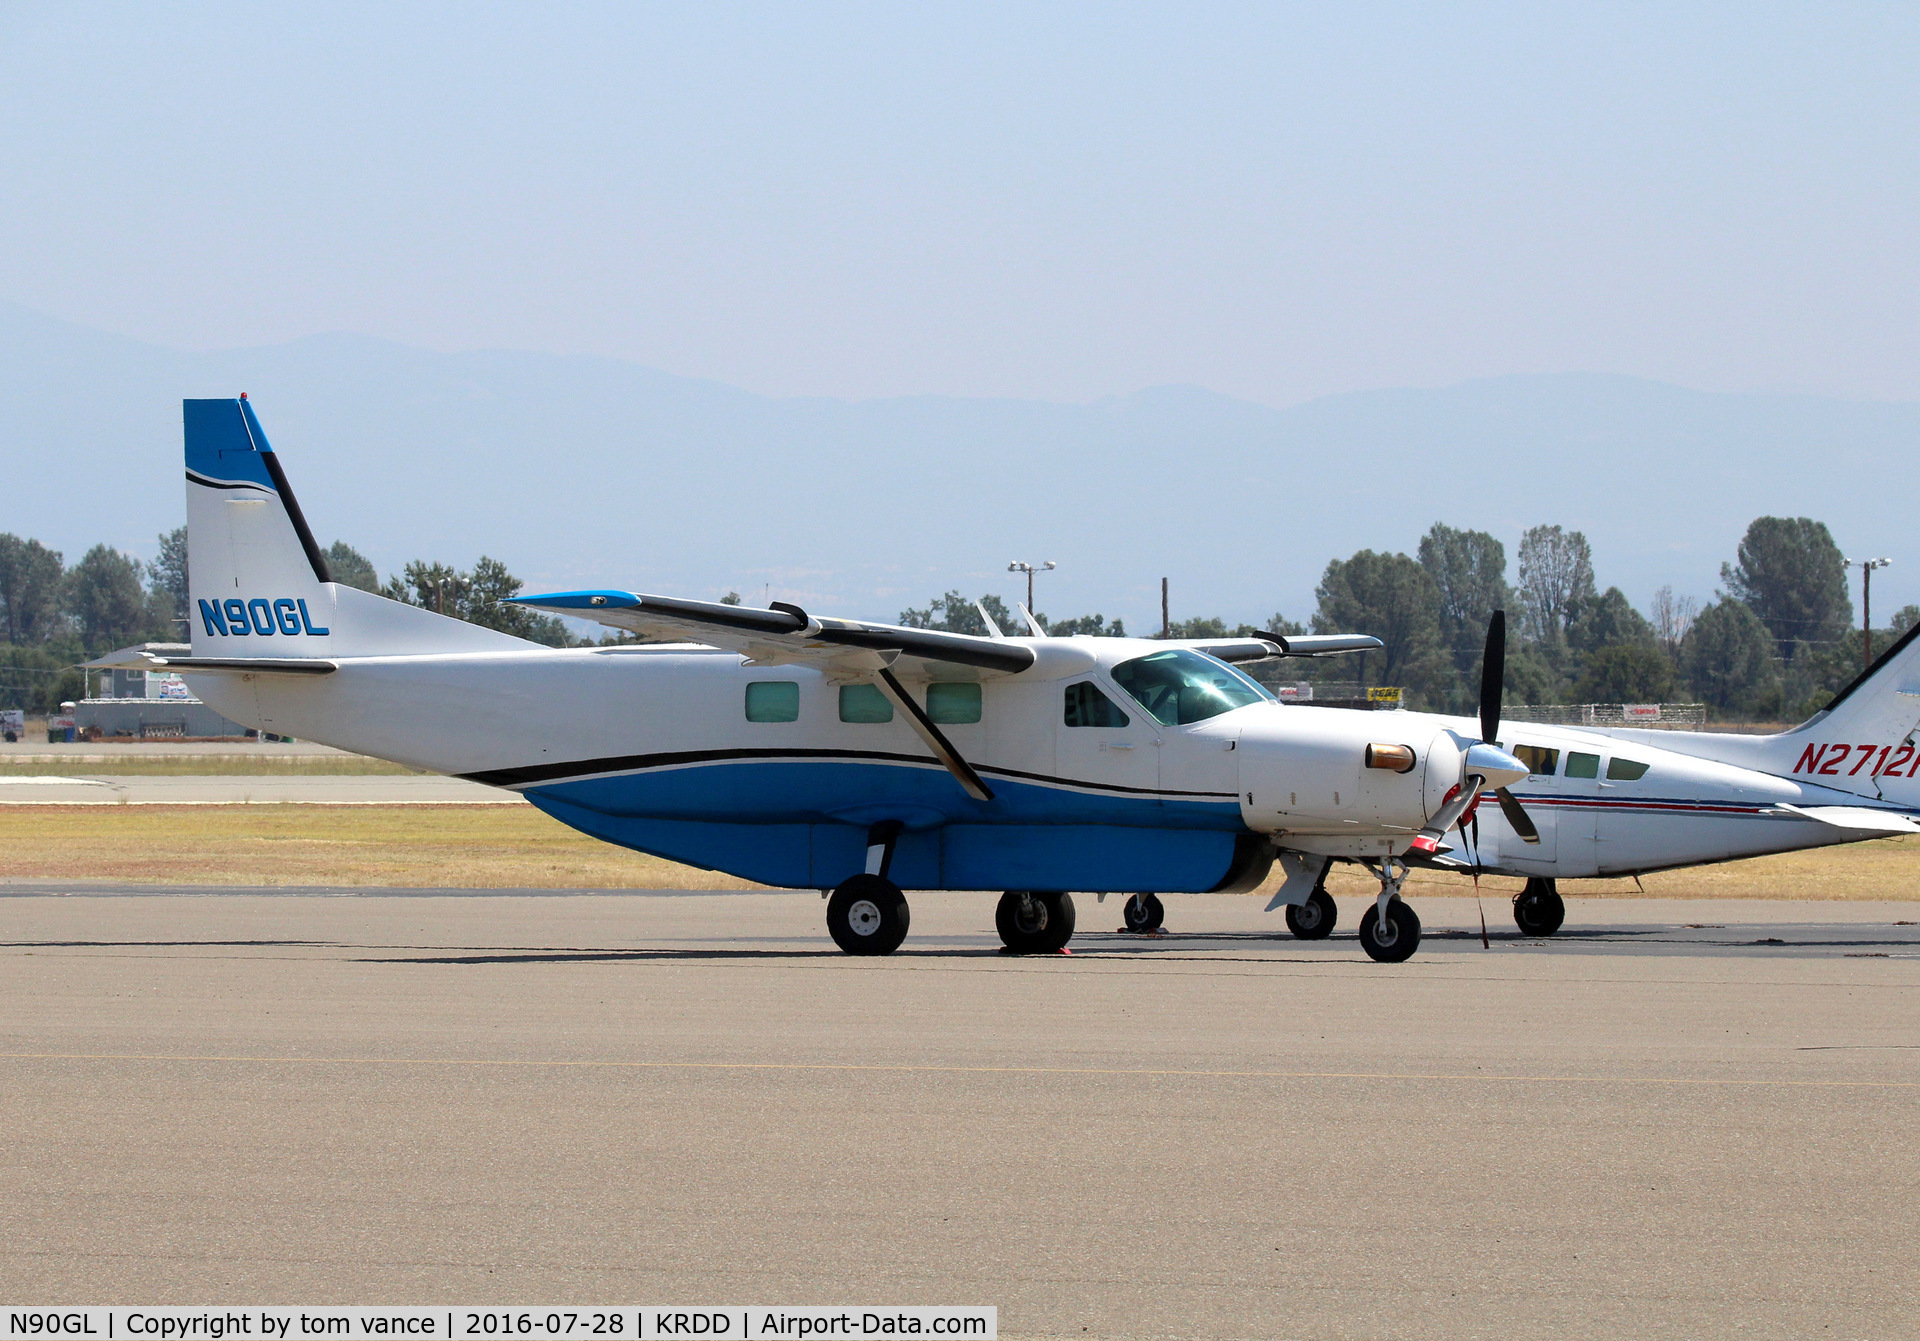 N90GL, 1990 Cessna 208B C/N 208B0229, 1st time I've seen this plane at Redding - possible package express for Redding Air Services.